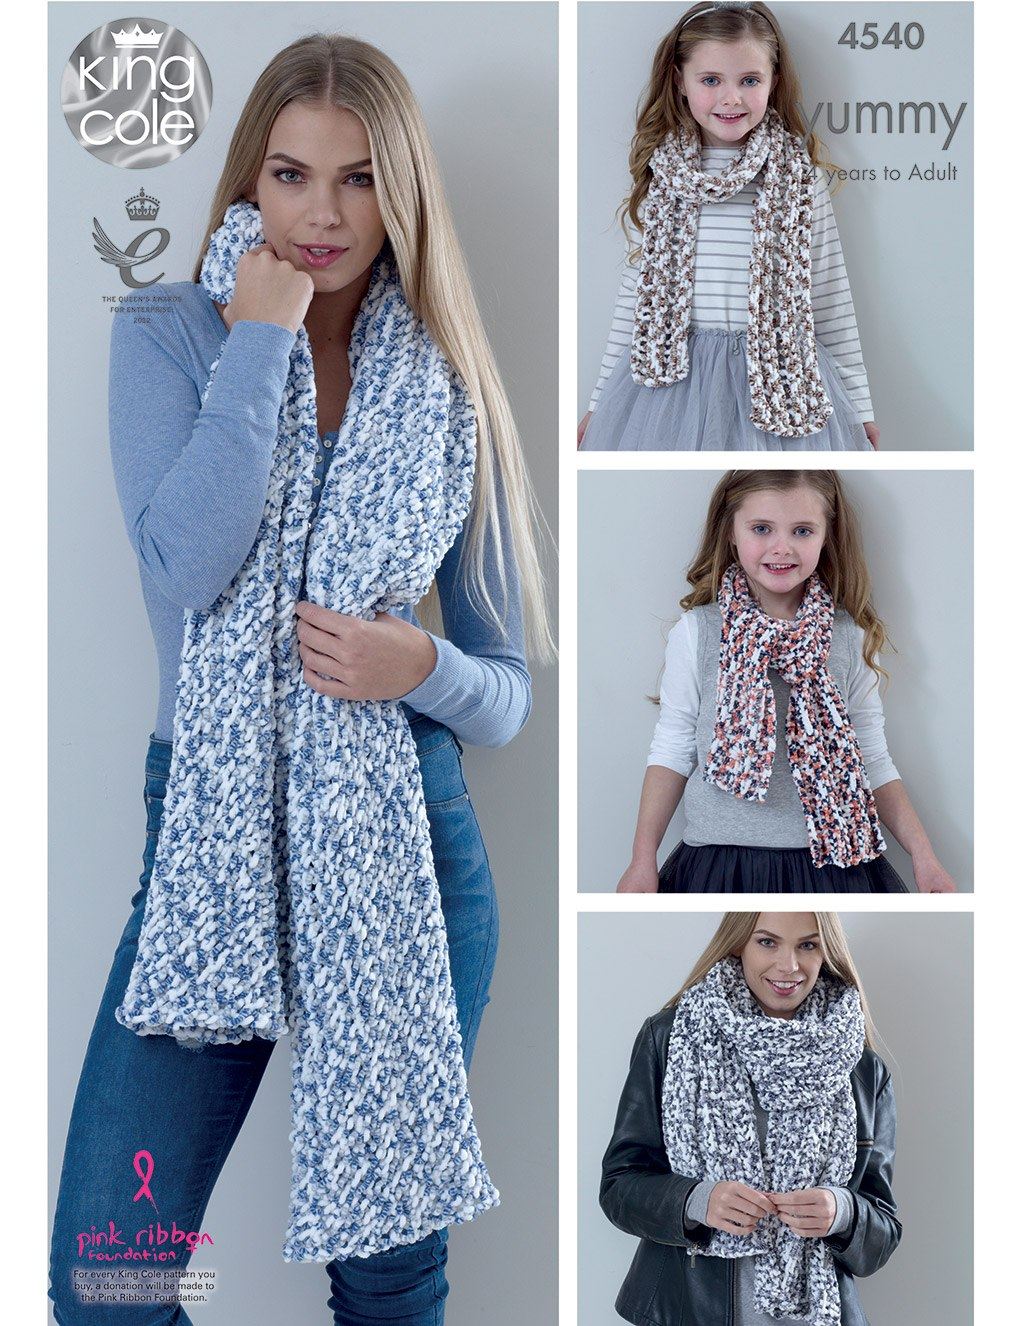 King Cole Yummy knitting pattern (4540) ladies shawls and girls scarves